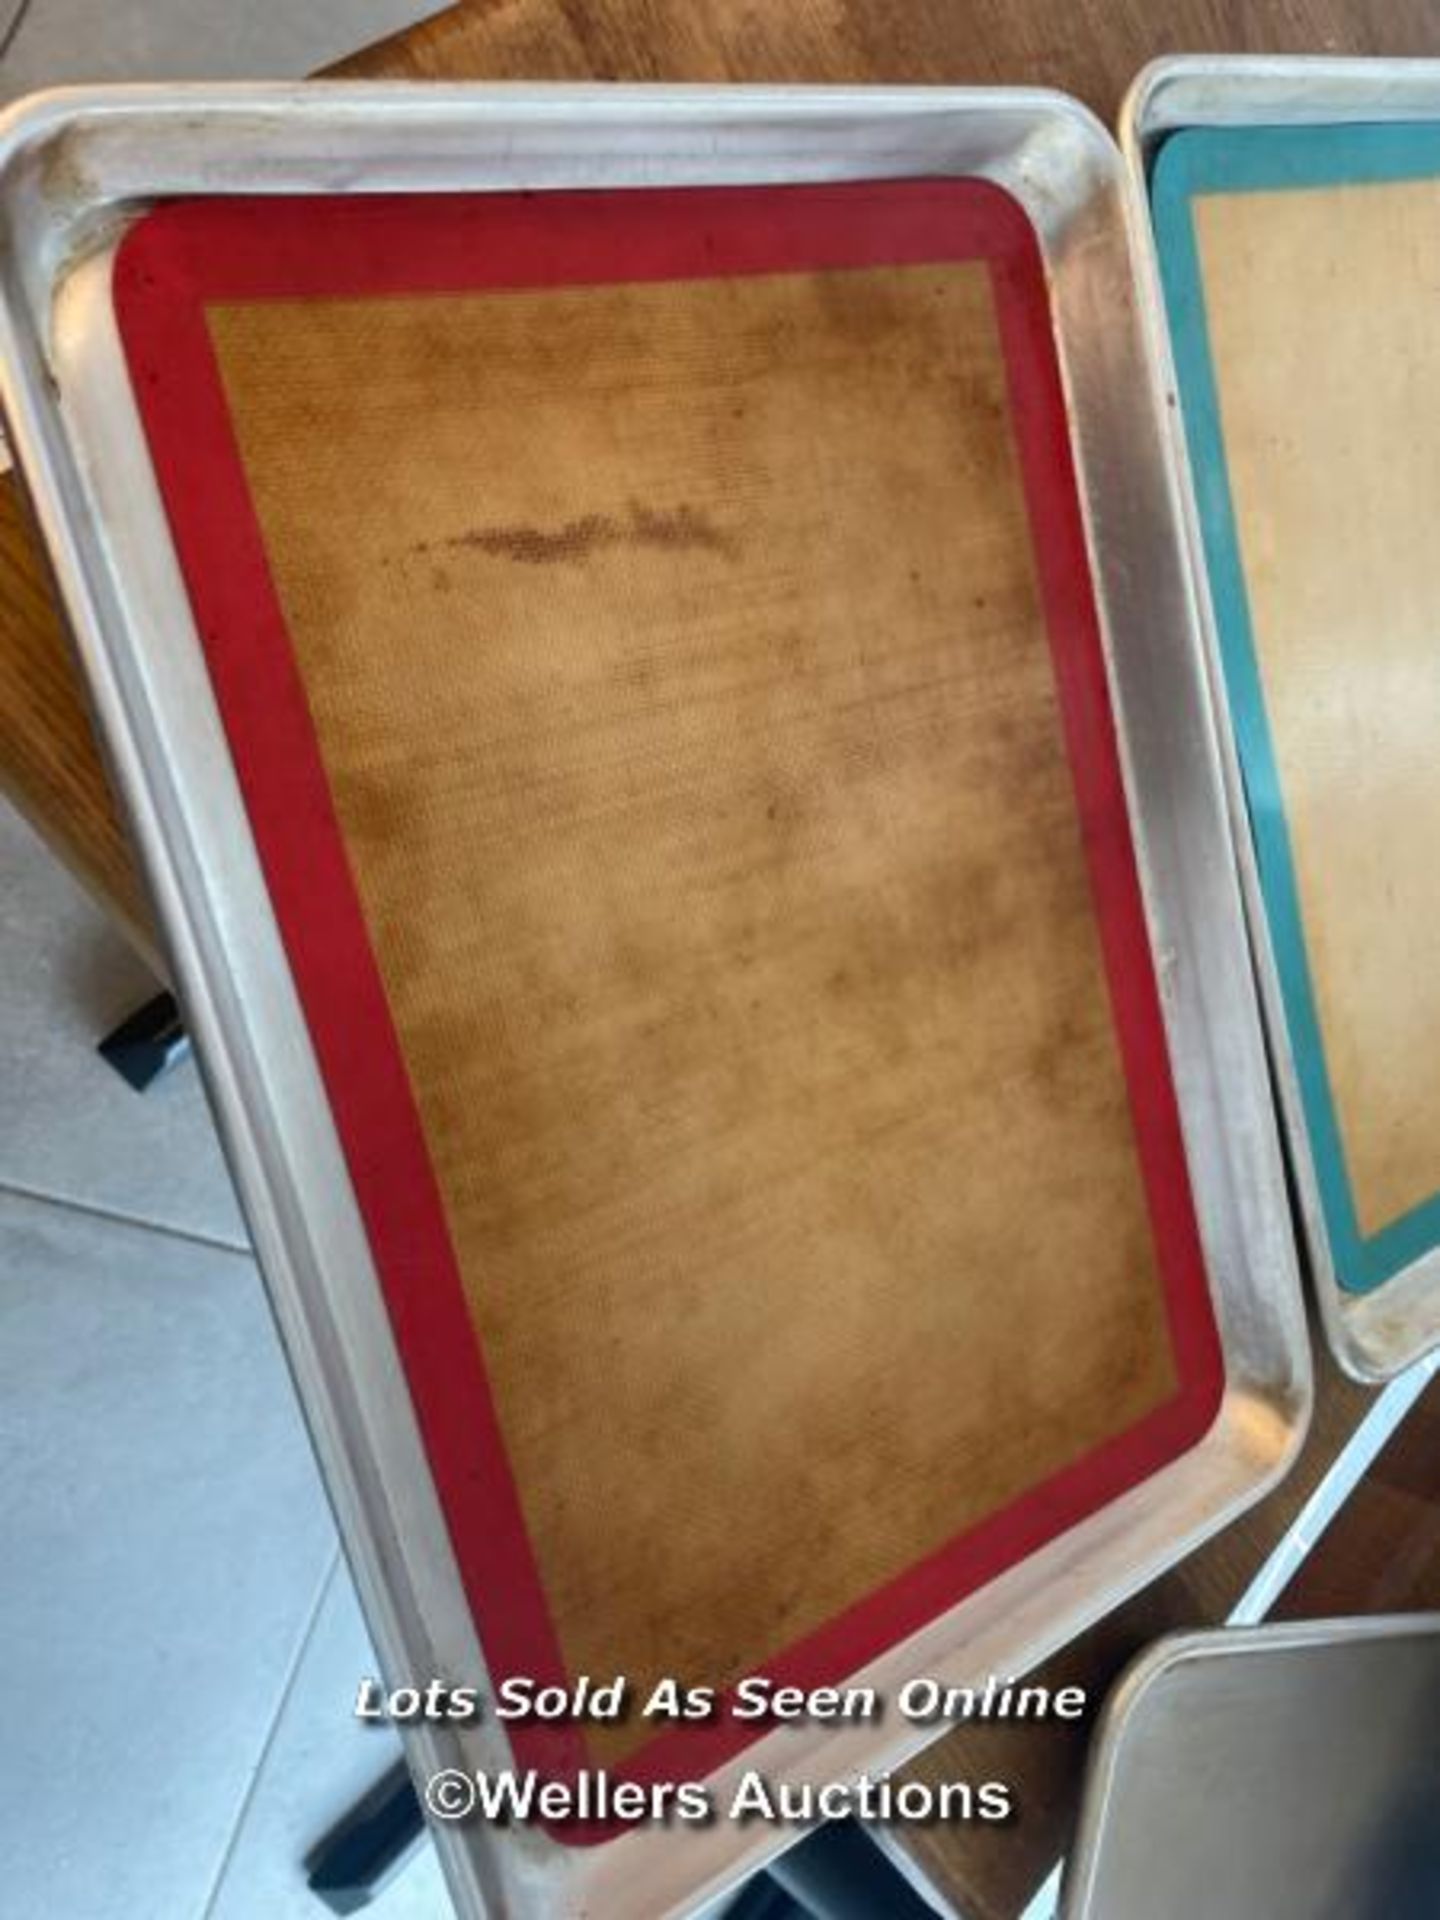 X6 TRAYS AND X3 CLIP BOARDS - INC. X4 LARGE TRAYS -66CM L X 45CM W / THE LOTS IN THIS AUCTION ARE - Image 2 of 3